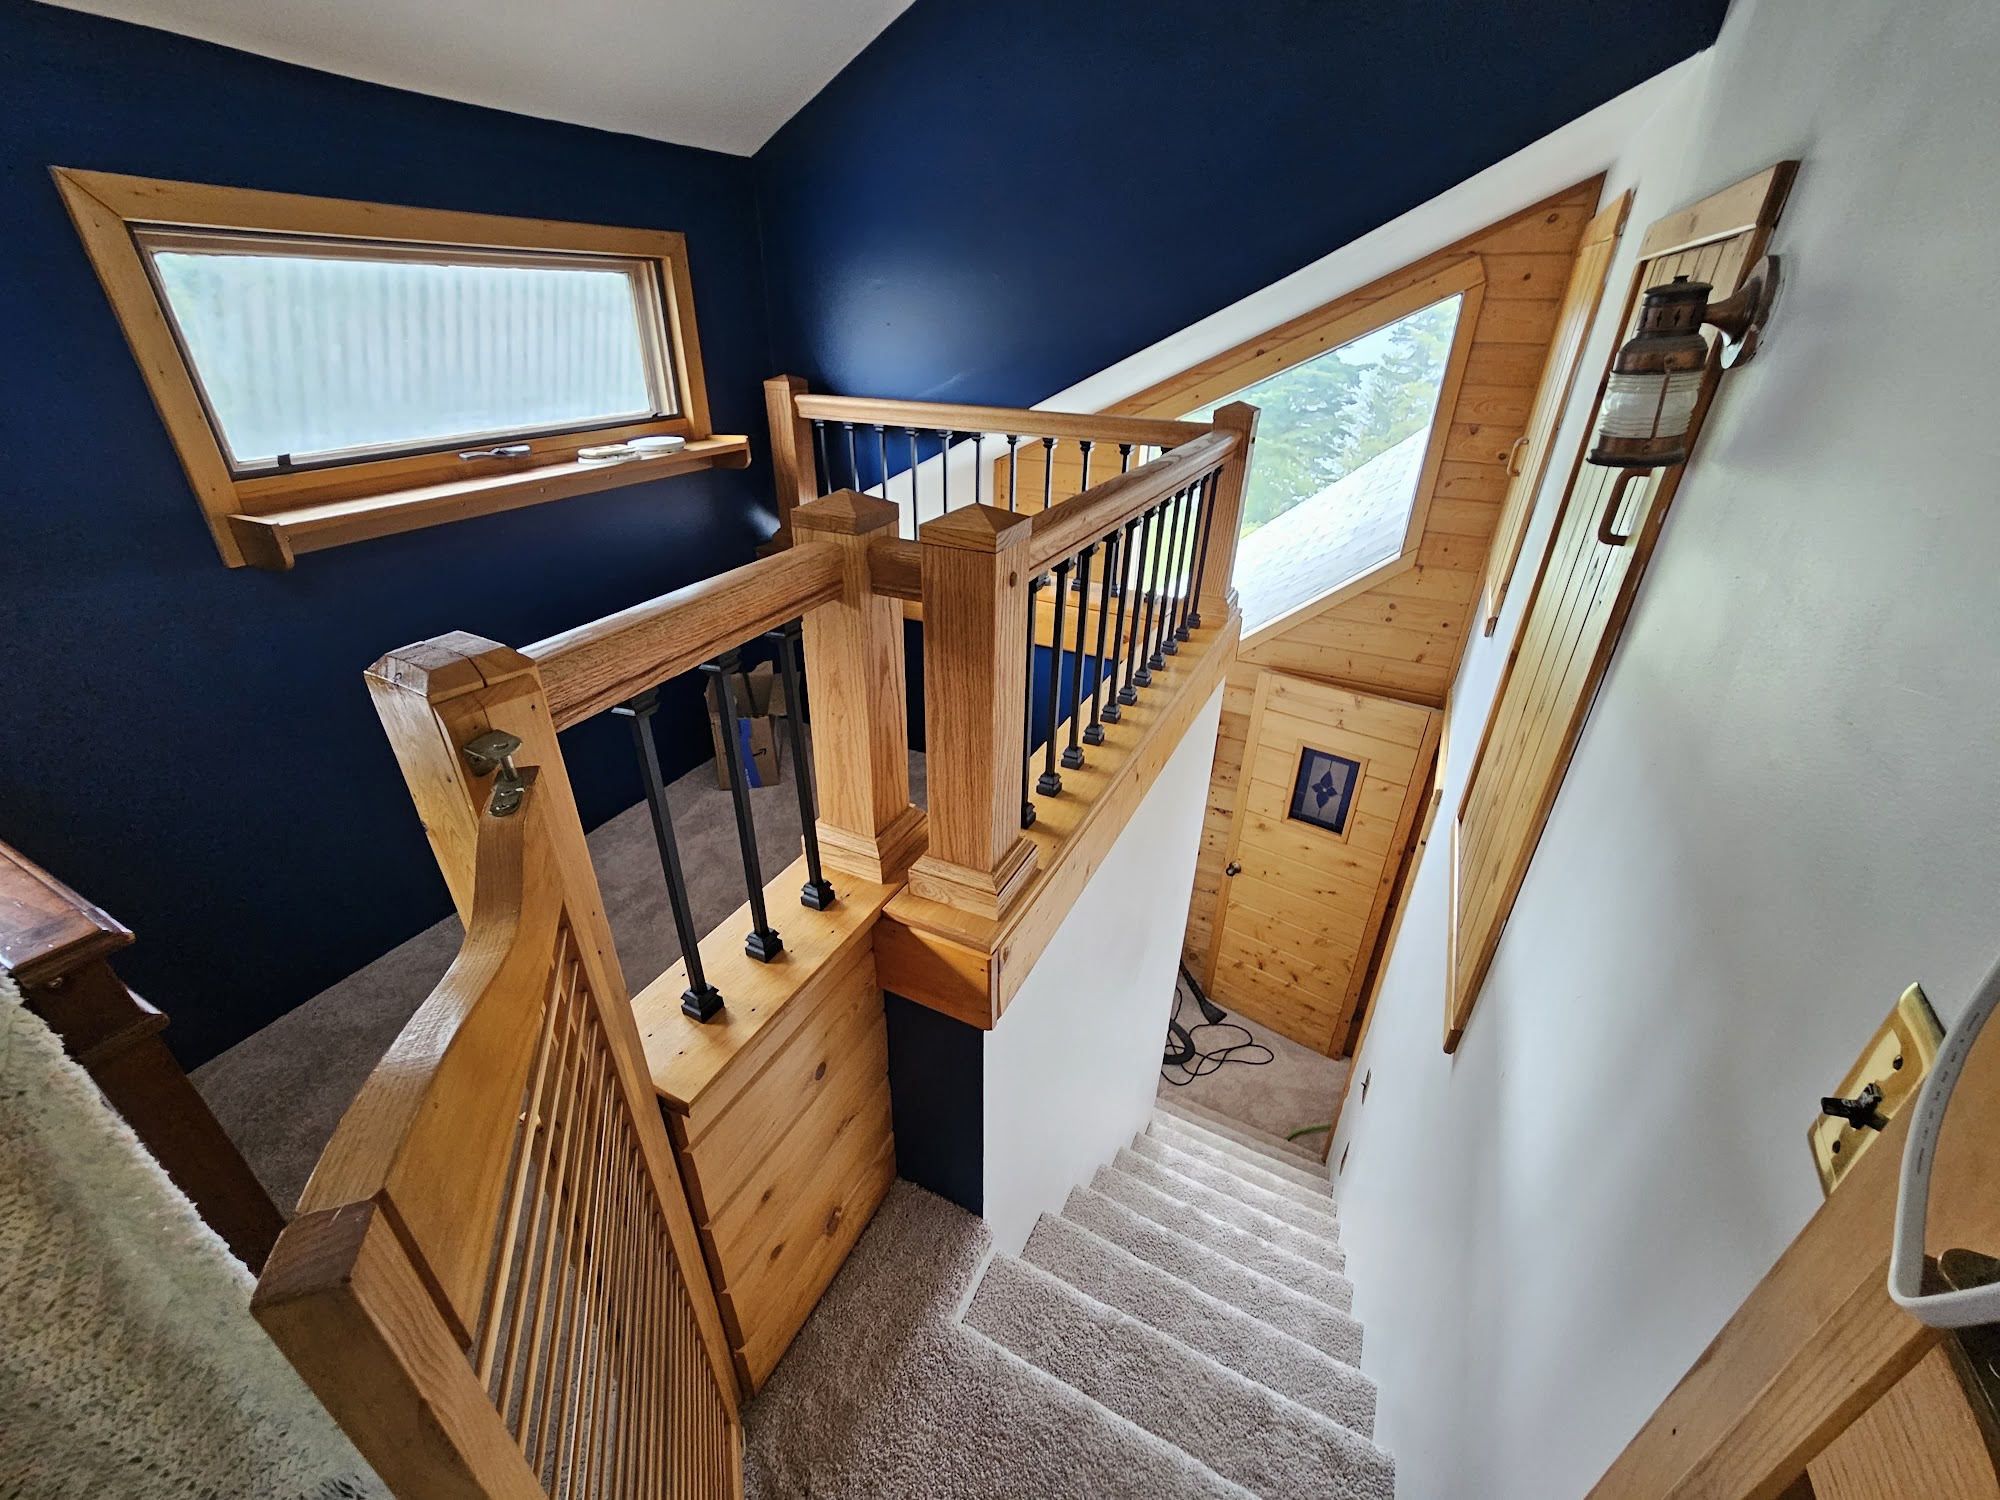 Two Harbors Construction & Remodeling 814 9th Ave, Two Harbors Minnesota 55616